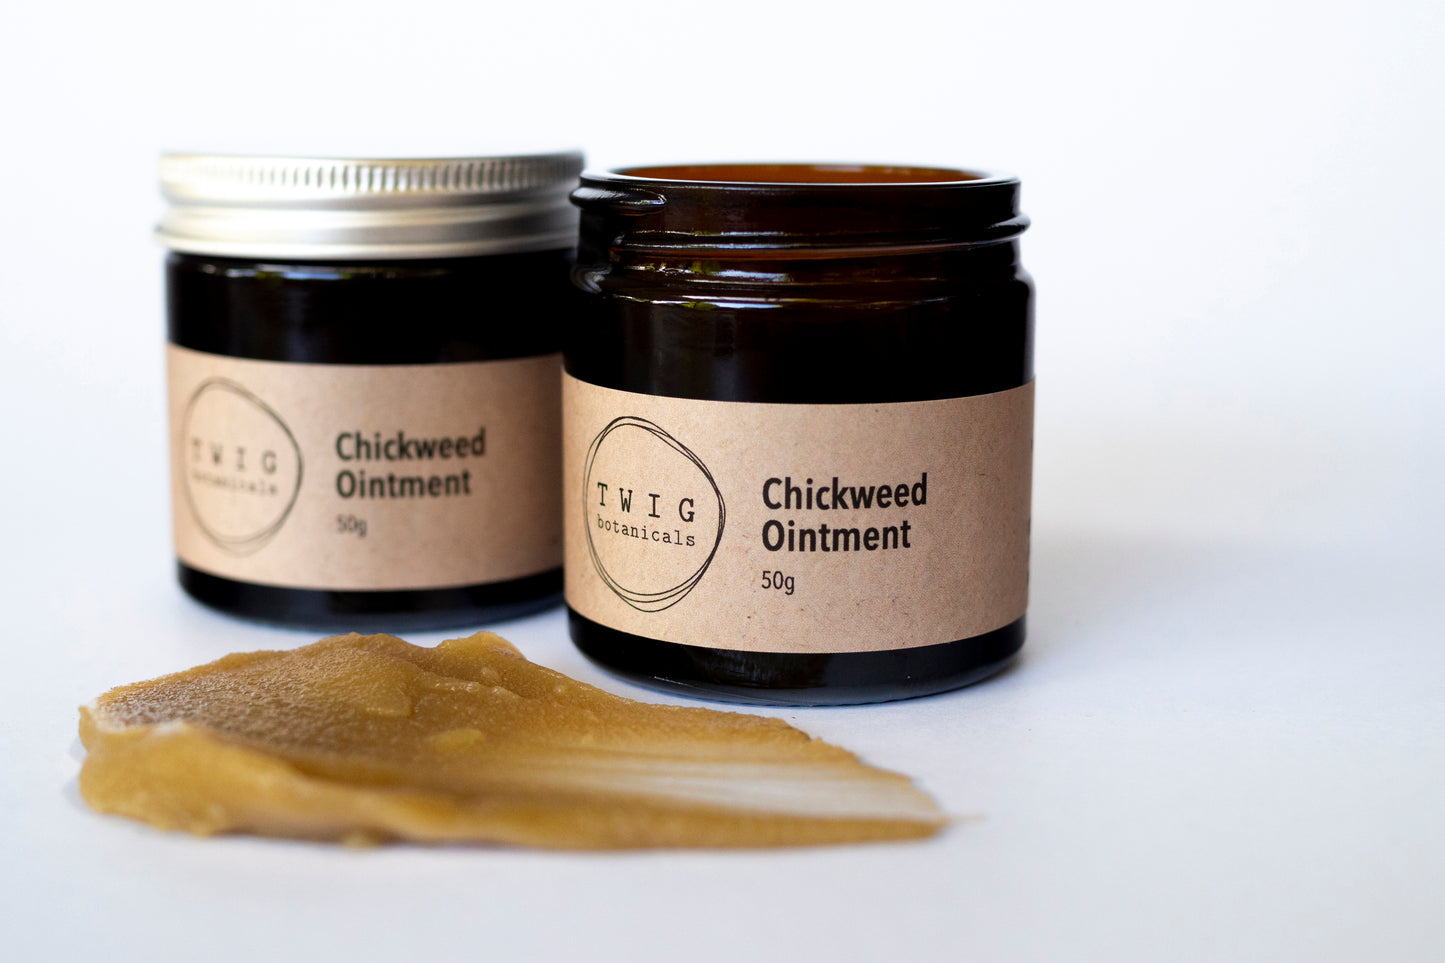 Chickweed Ointment